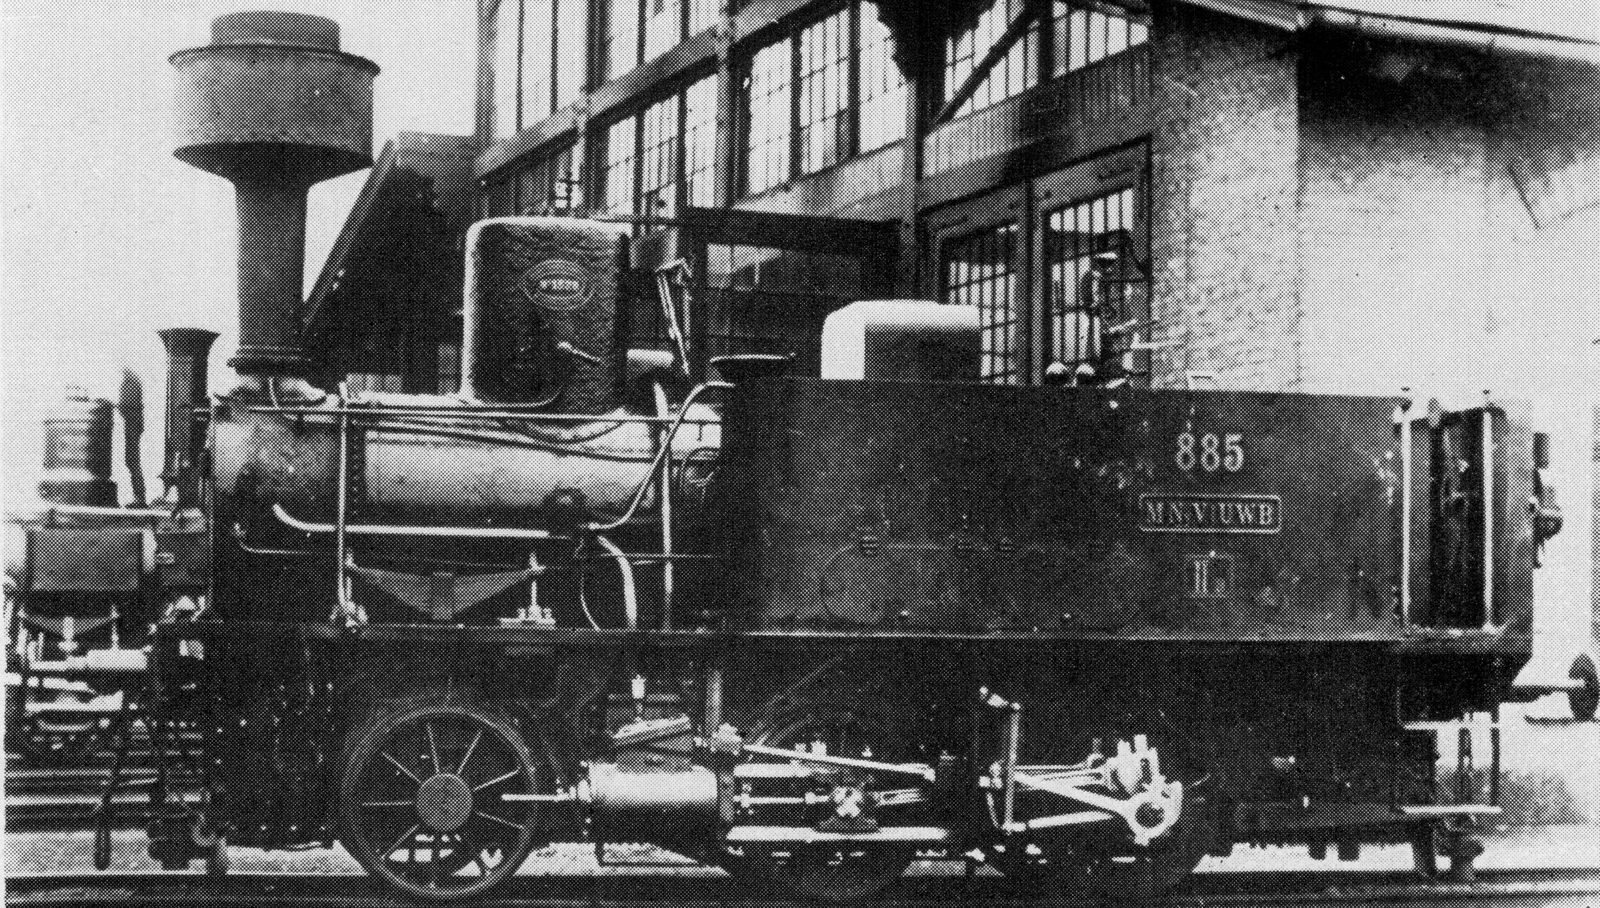 No. 885 before the rebuild with a 2-4-0T wheel arrangement